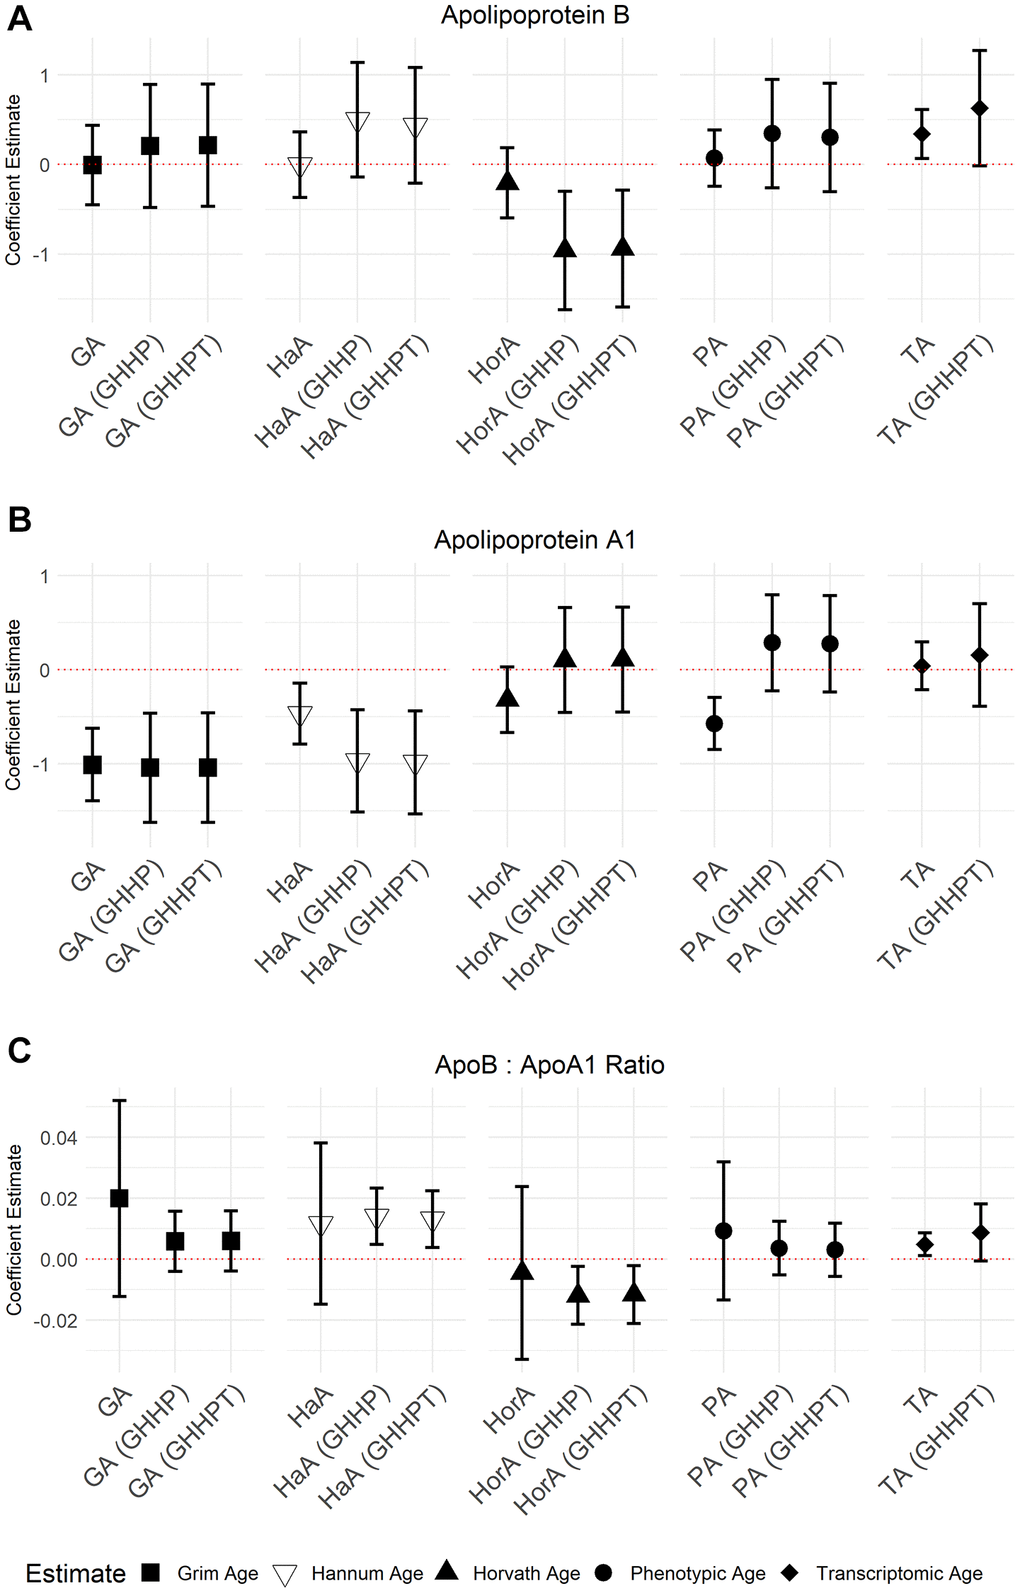 Models of associations between ApoB, ApoA-1, and the ApoB: A-1 ratio NMR biomarkers and accelerated ages of epigenetic and transcriptomic biomarkers. Models were run with aging predictors (Abbreviations: GA: GrimAge; HaA: Hannum Age; HorA: Horvath Age; PA: Phenotypic Age; TA: Transcriptomic Age) and then adjusted for other aging biomarkers. Models with accelerated ages of epigenetic aging biomarkers were adjusted for GrimAge, Hannum Age, Horvath Age, and Phenotypic Age (GHHP). Models with accelerated ages of transcriptomic and epigenetic biomarkers were adjusted for GrimAge, Hannum Age, Horvath Age, Phenotypic Age, and Transcriptomic Age (GHHPT). Error bars represent a 95% confidence interval. (A–C) show the association between Apolipoprotein B, Apolipoprotein A-1, and the ApolipoproteinB: A-1 ratio and the aging predictors, respectively.